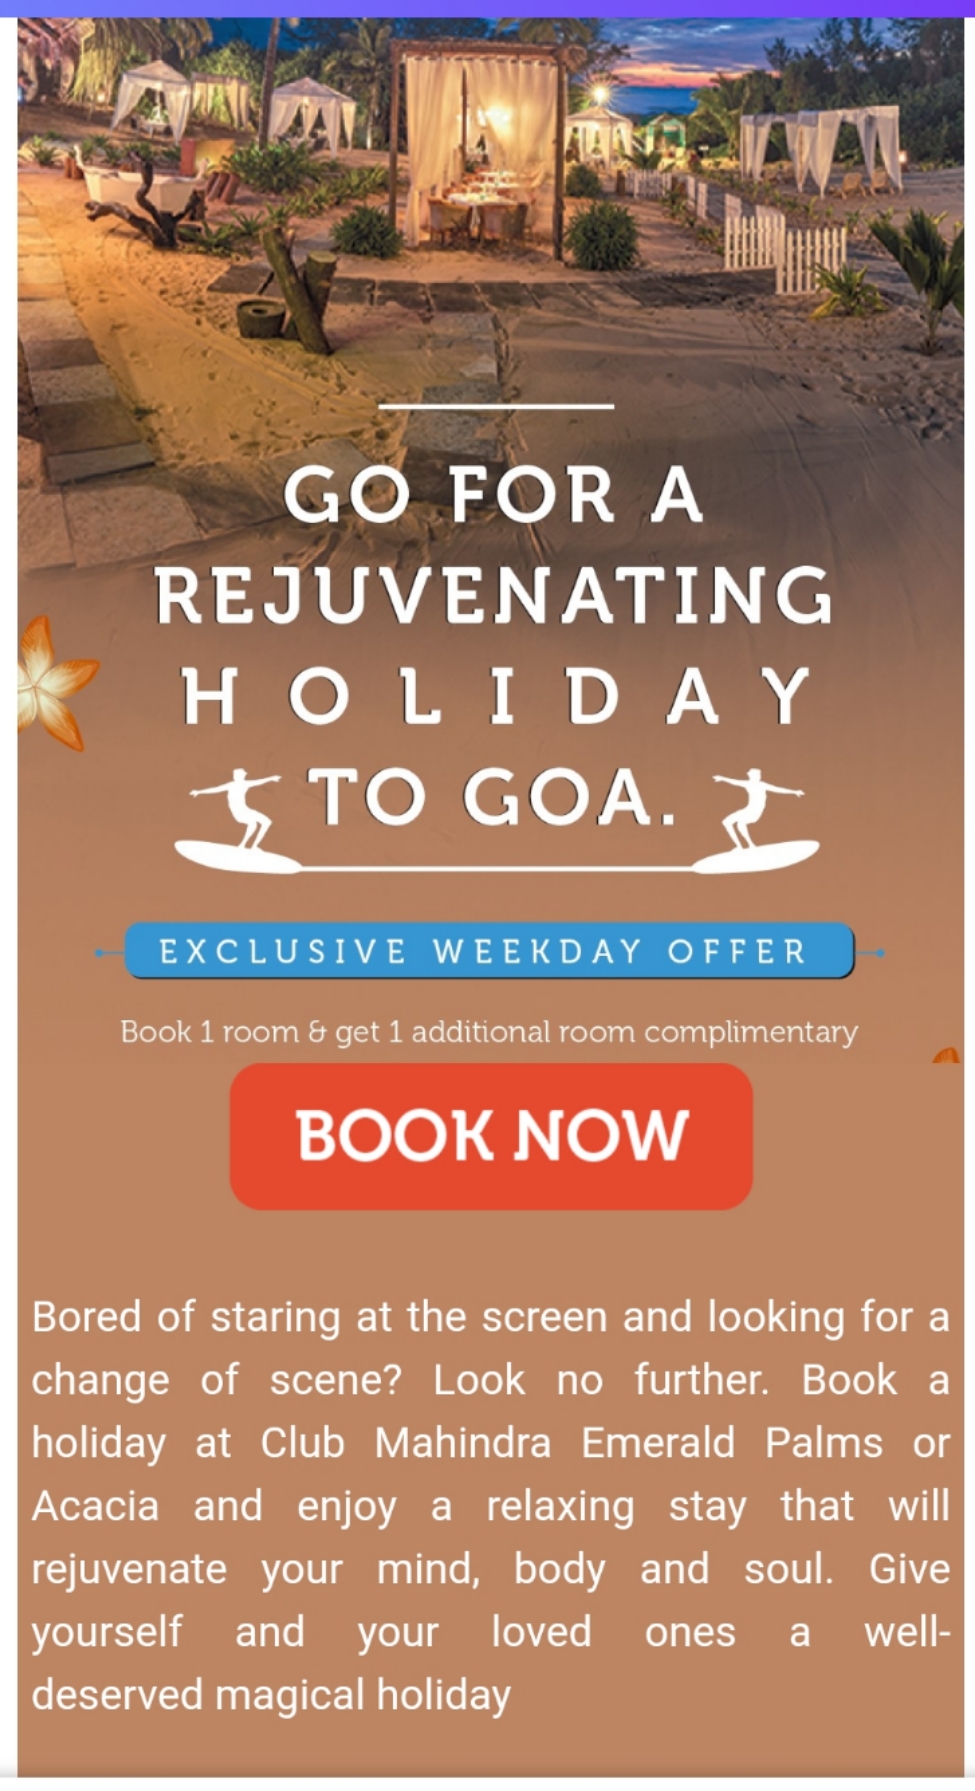 I received an email with this attachment stating book 1 room and get 1 room complimentary but how do i go ahead with the booking. The BOOK NOW button takes me to the portal but the offer is not seen there, no further instructions either. How to proceed?